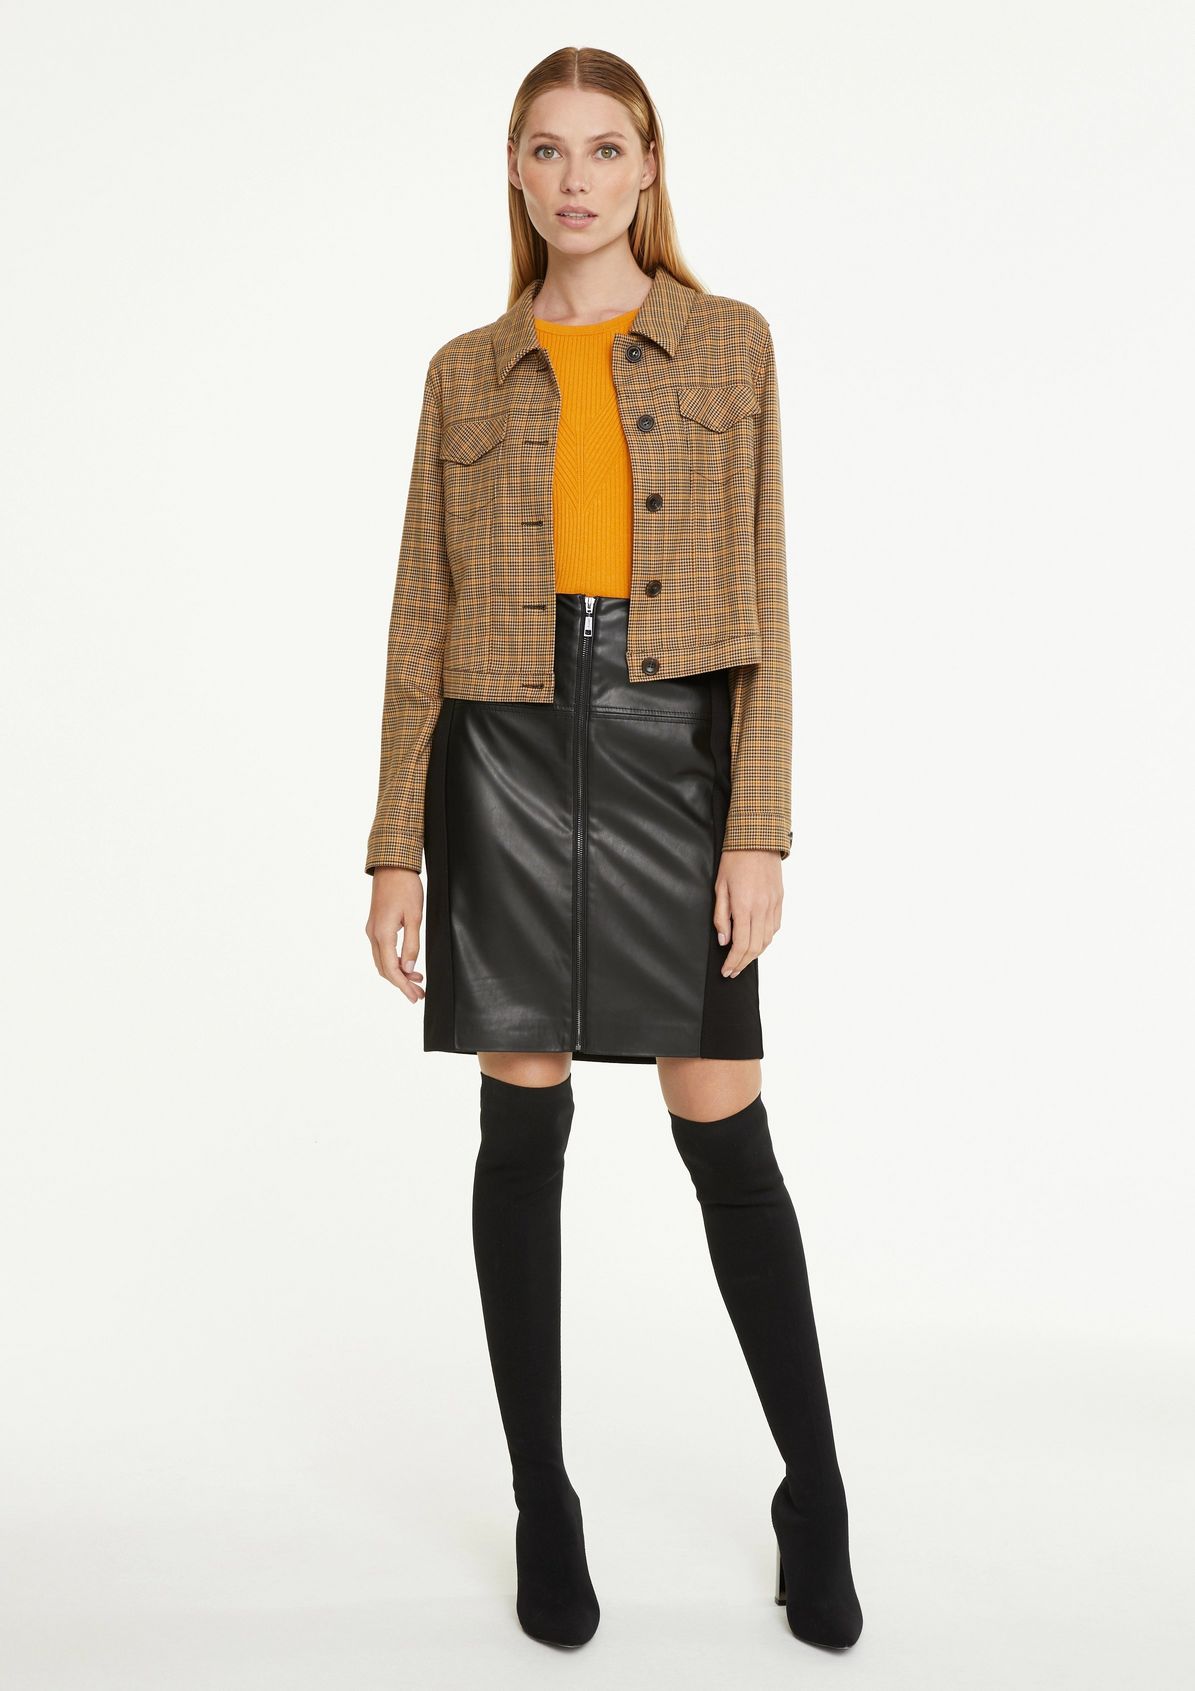 Fabric mix pencil skirt from comma